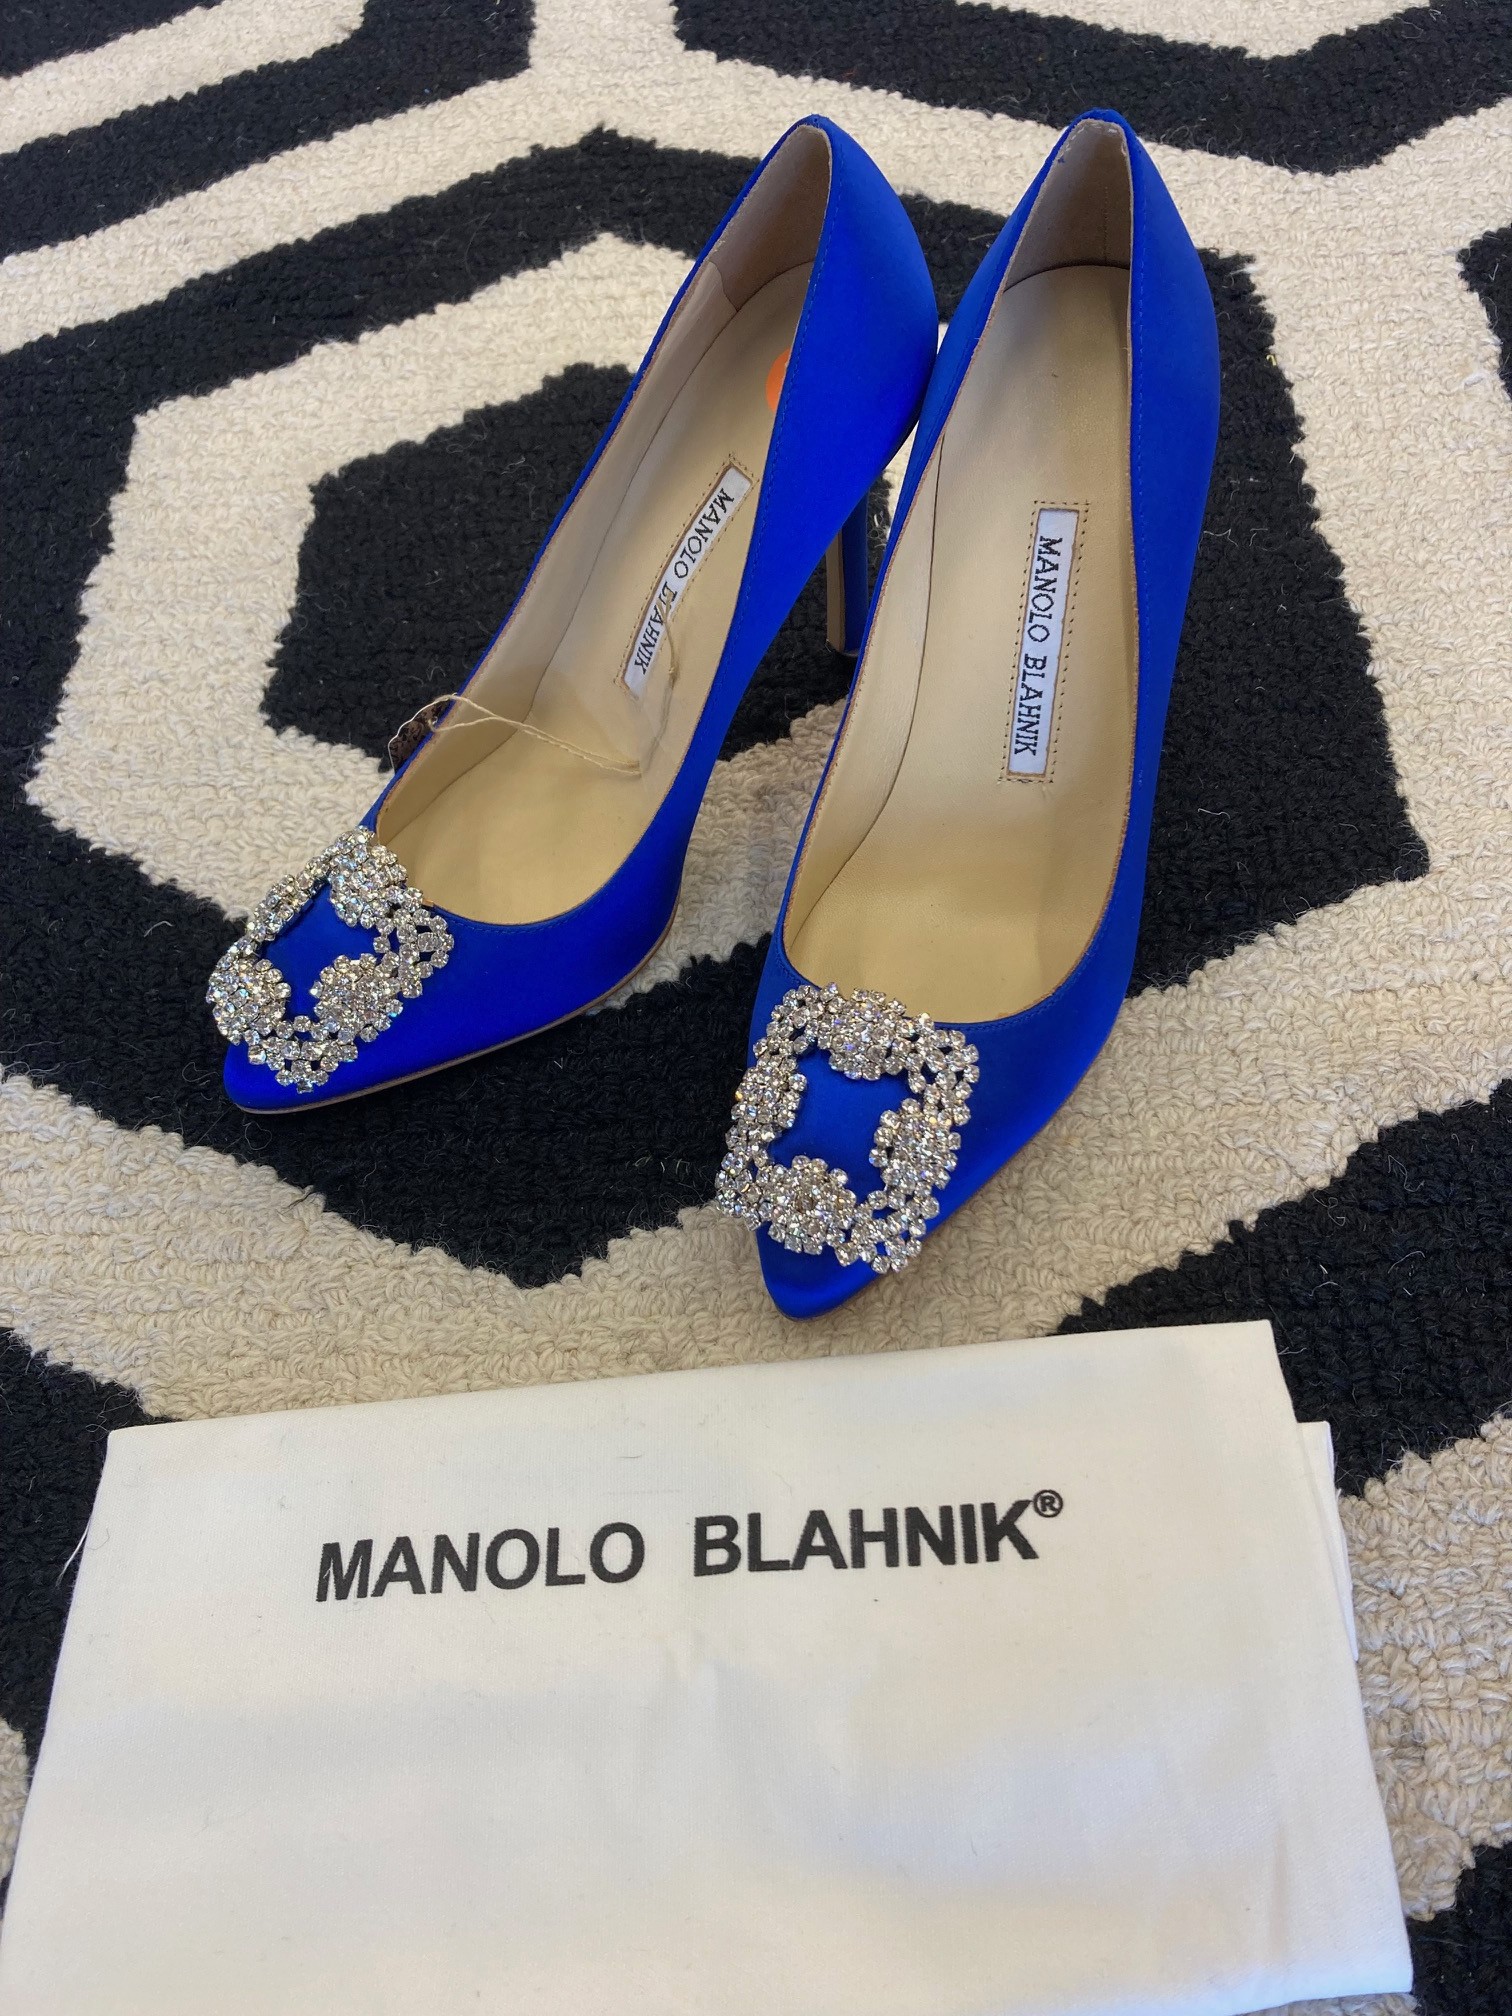 M.Blahnik: Beautiful in blue with bling! The perfect touch for your formal look. Looks like they have never been worn!  These are awesome faux heels.